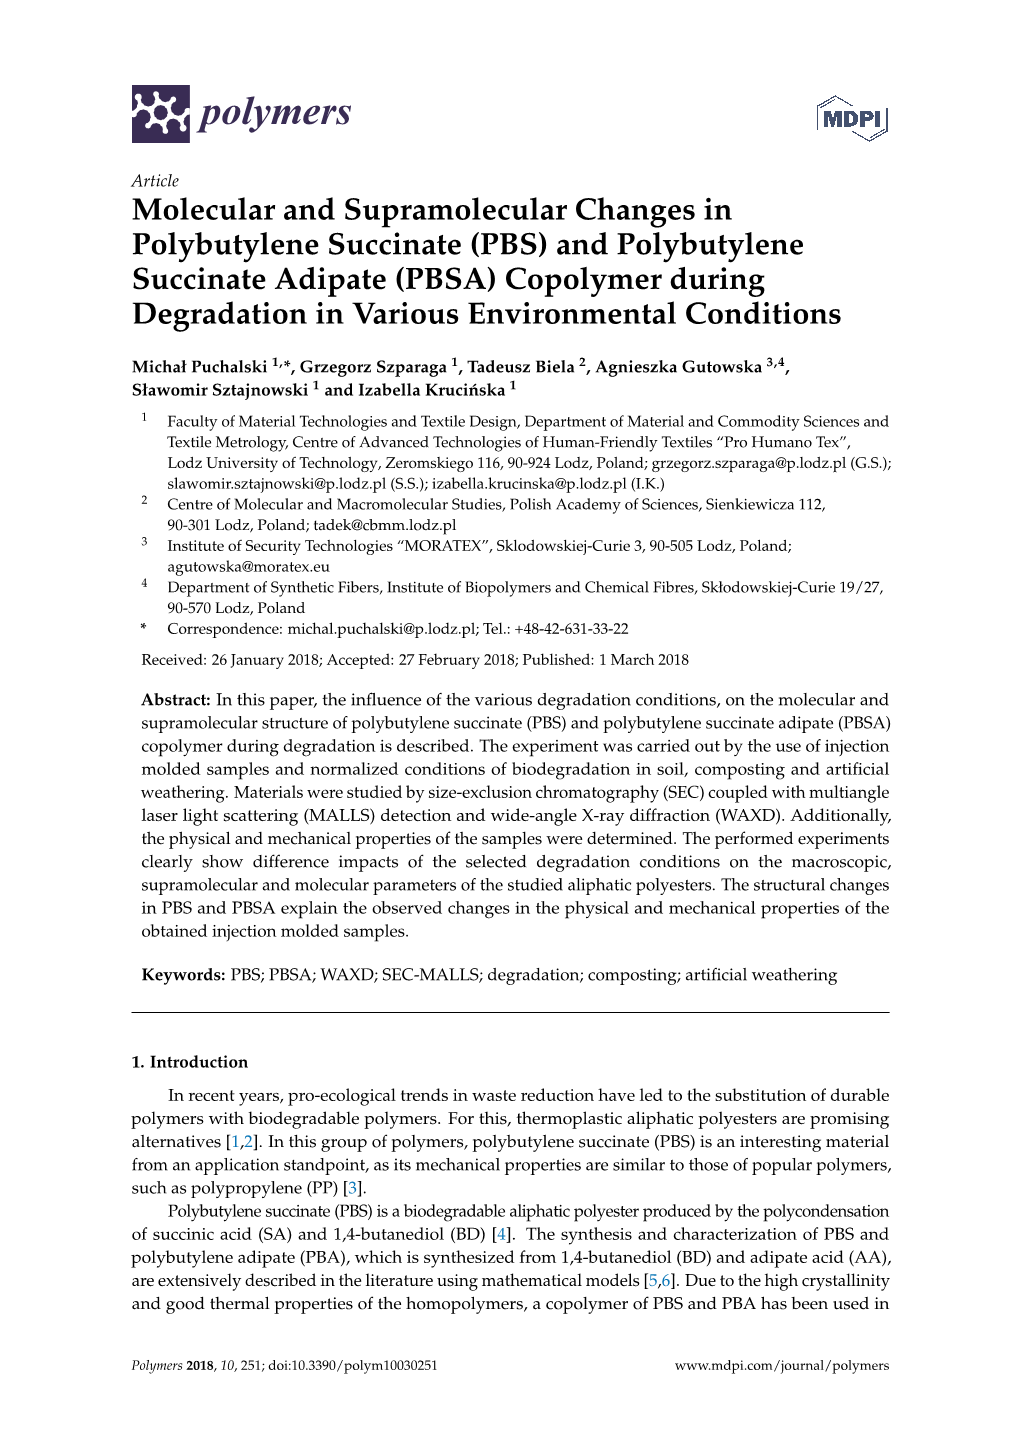 And Polybutylene Succinate Adipate (PBSA) Copolymer During Degradation in Various Environmental Conditions